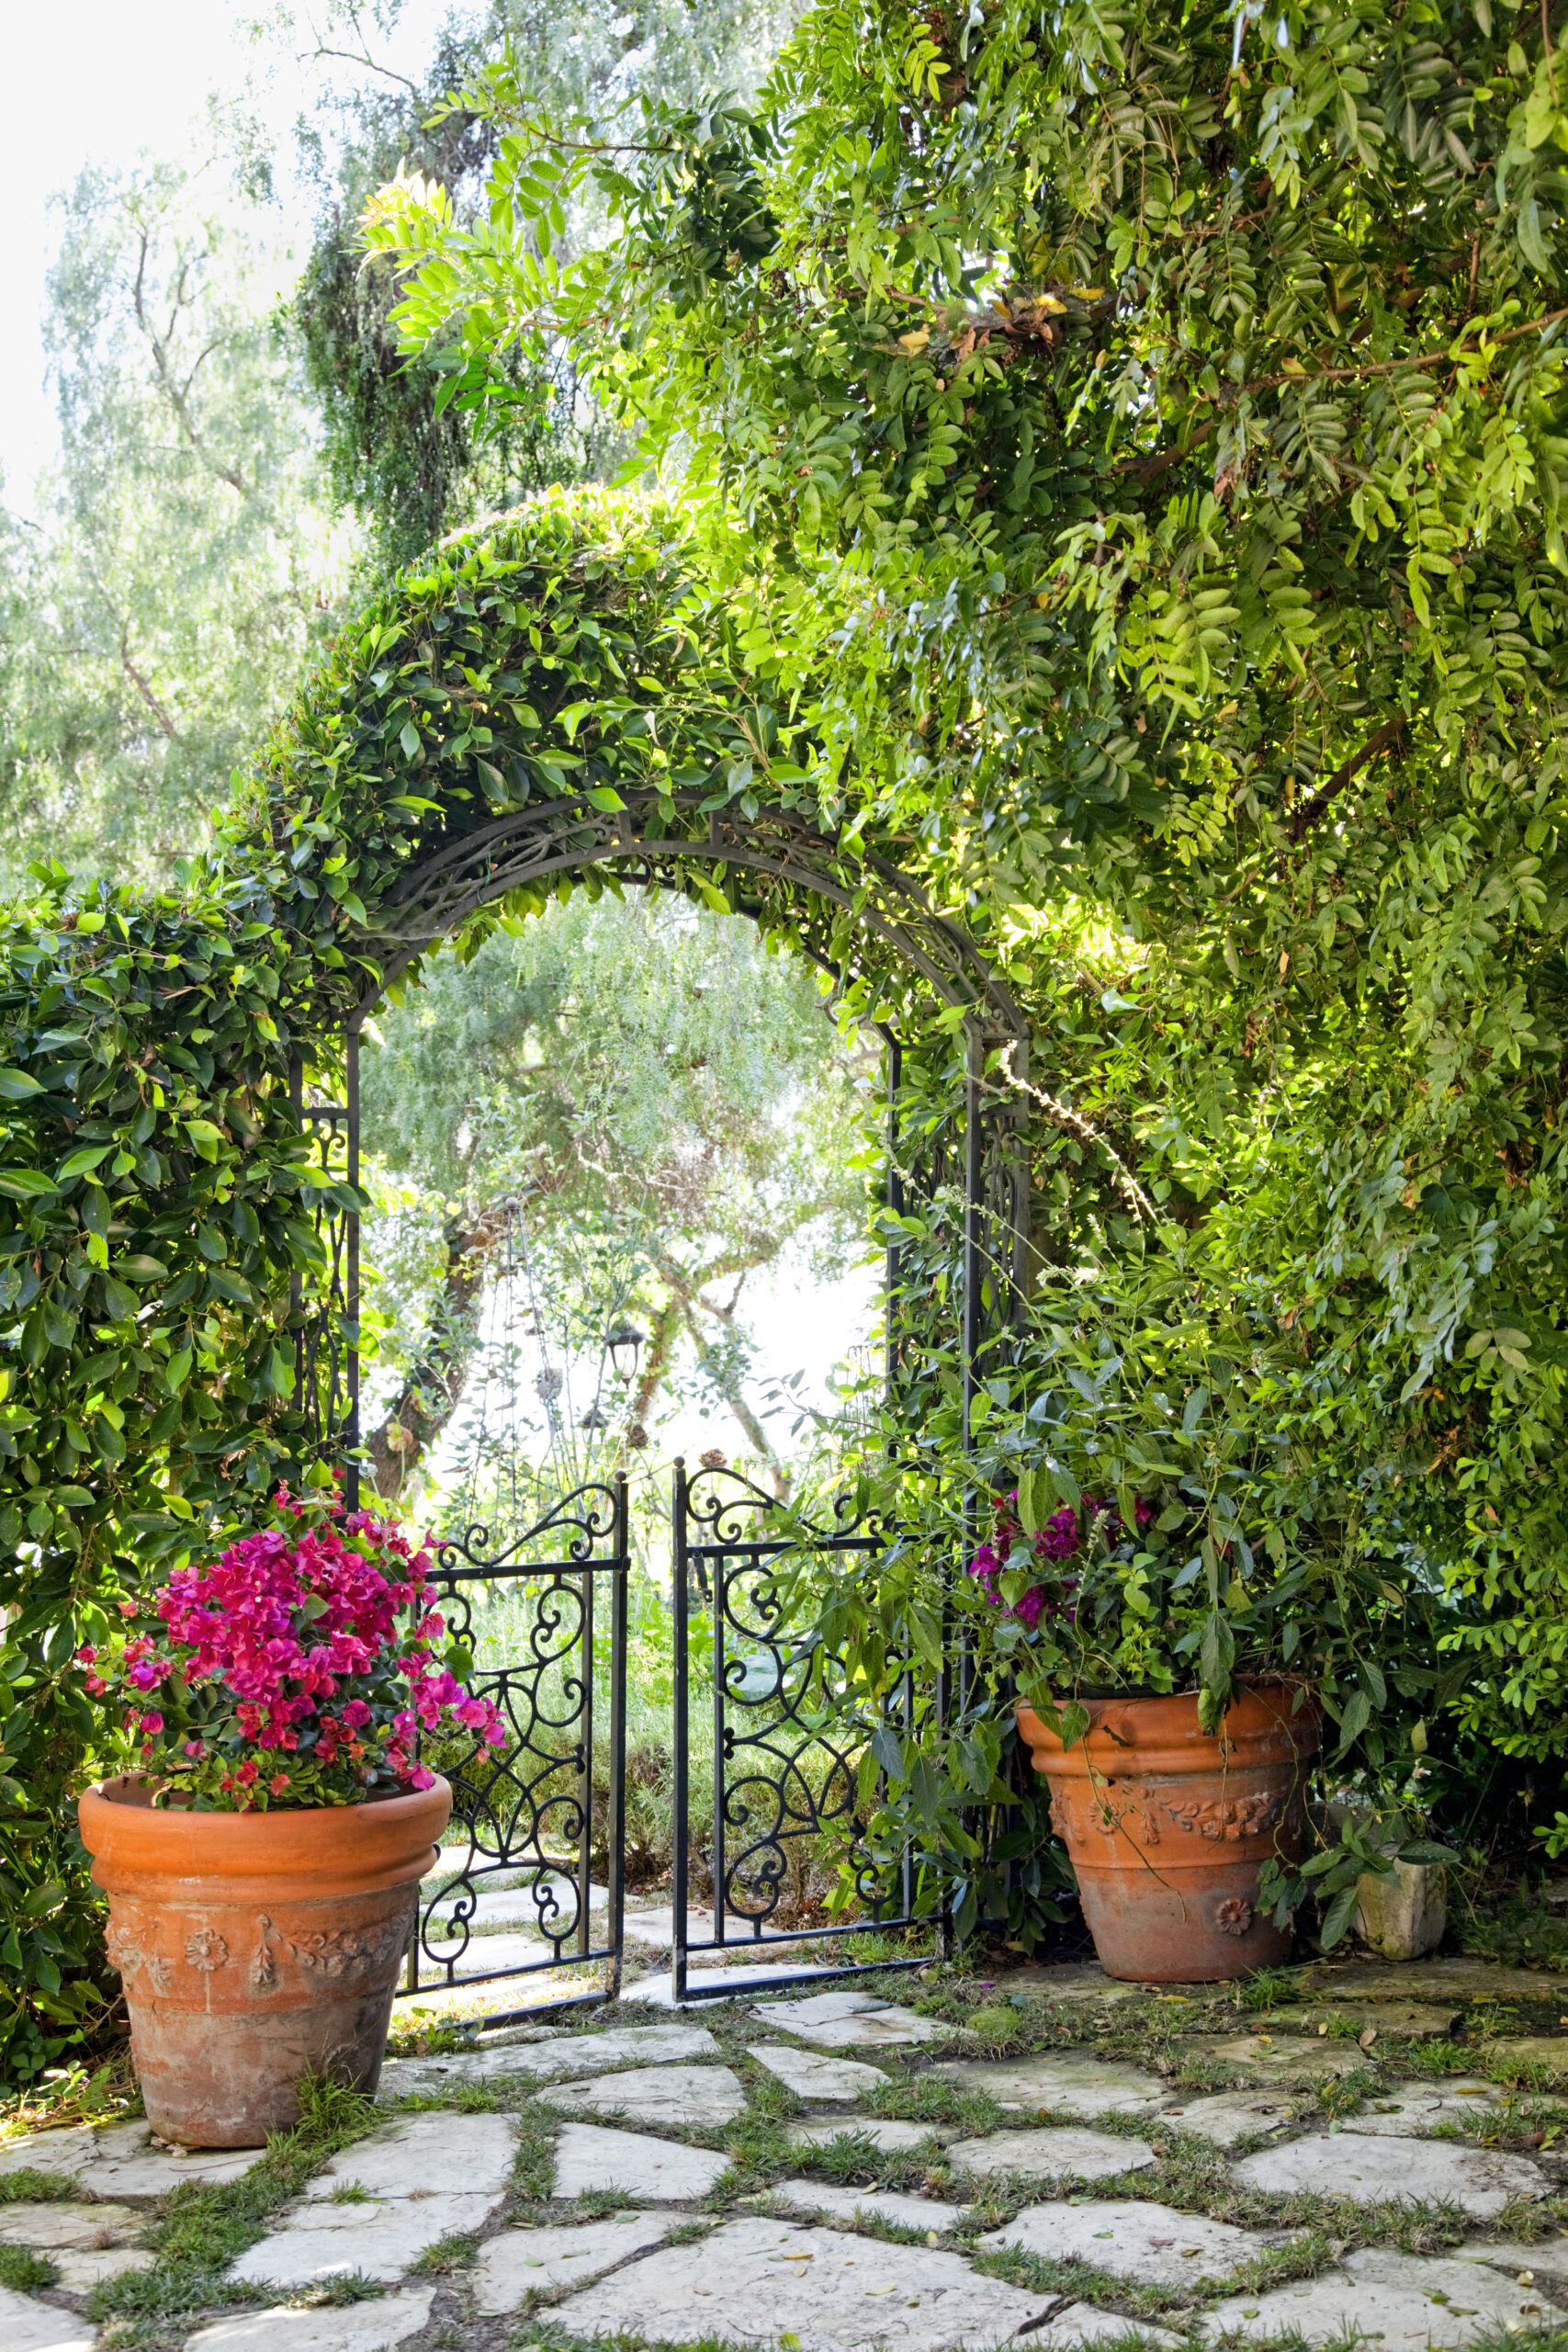 18 Tips For Decorating Your Garden - This Old House